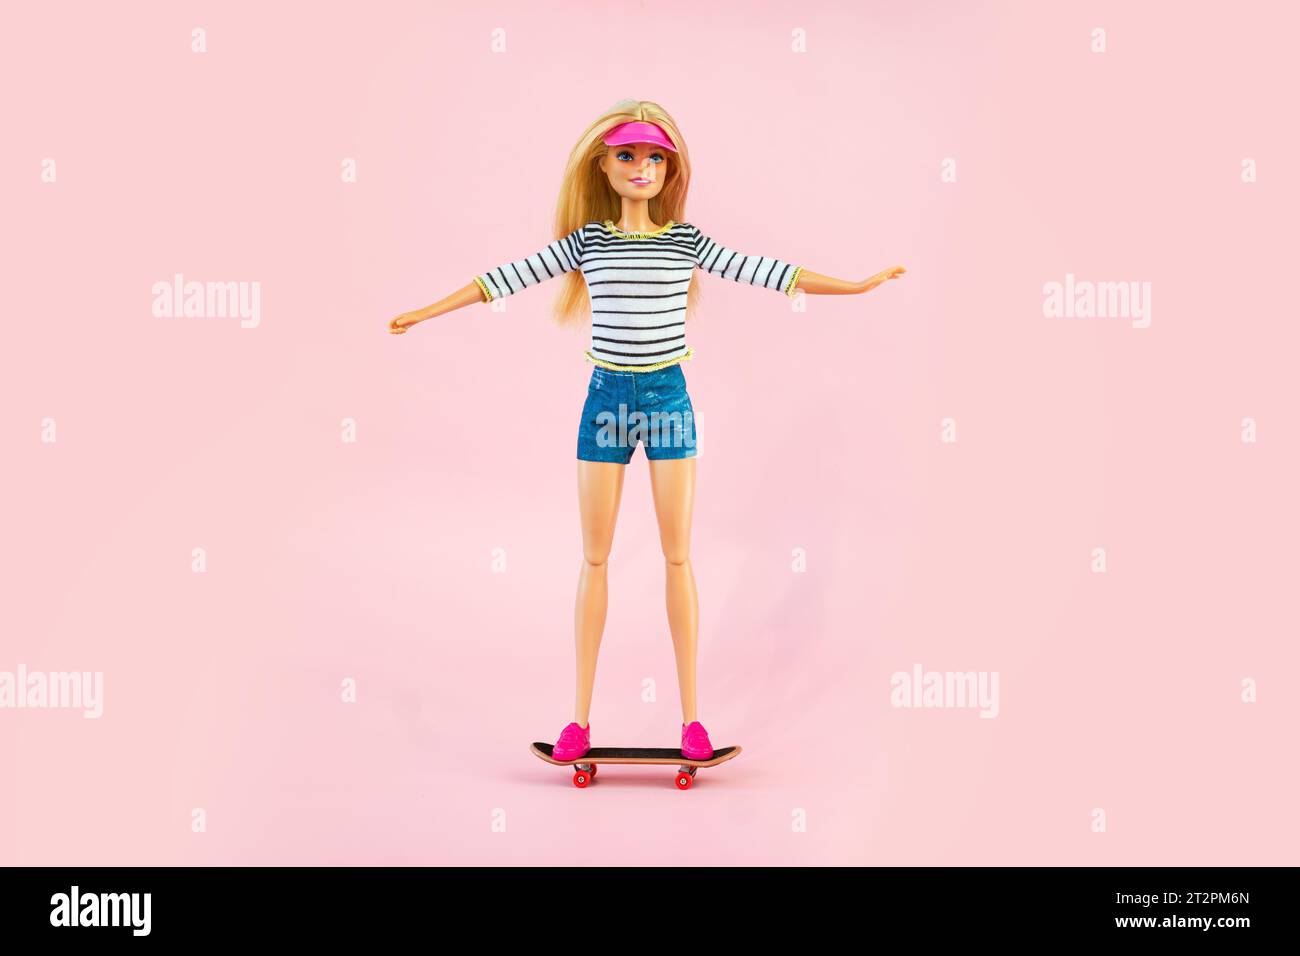 October 9, 2023. Barnaul, Russia: Barbie doll in sportswear riding a skateboard on a pink background Stock Photo